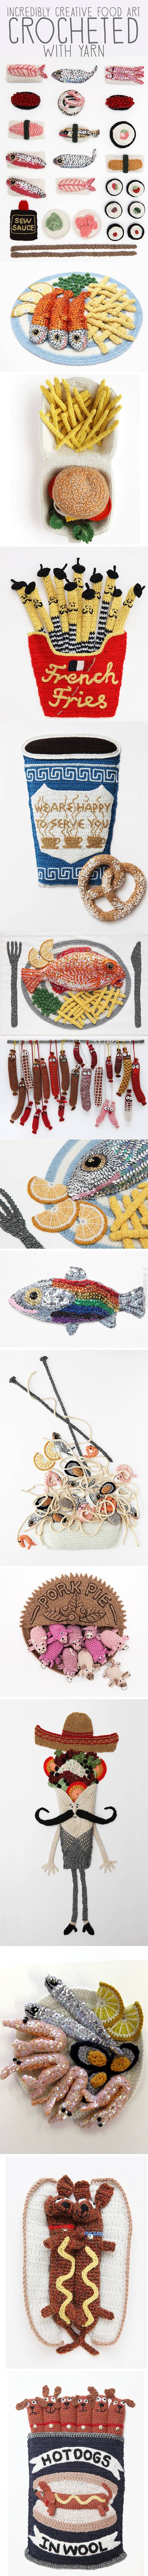 Crocheted+foods.